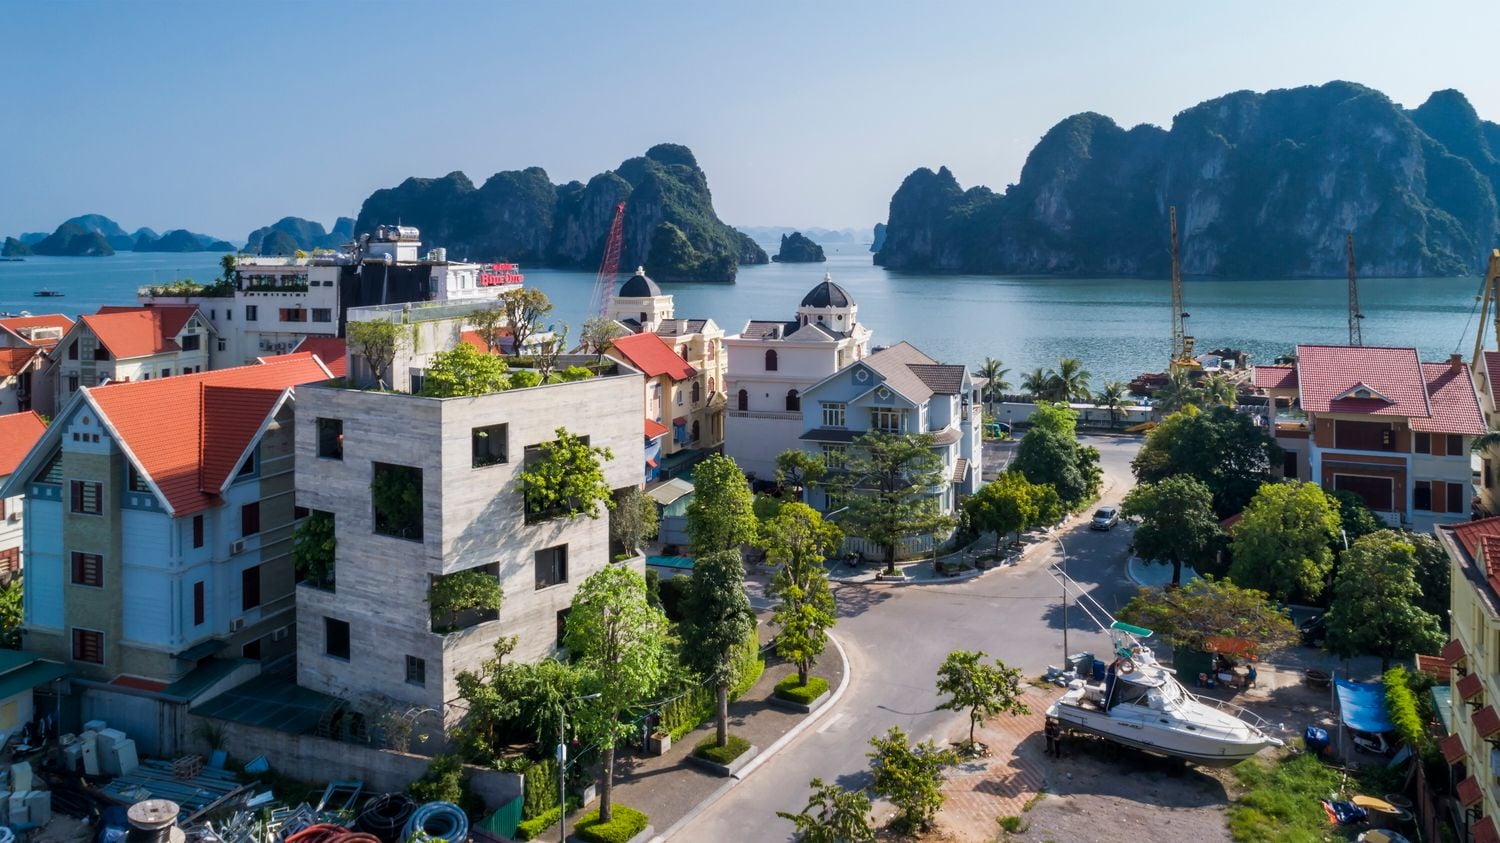 In addition to its one-of-a-kind architecture, the Ha Long Villa also boasts an incredible coastal location. 